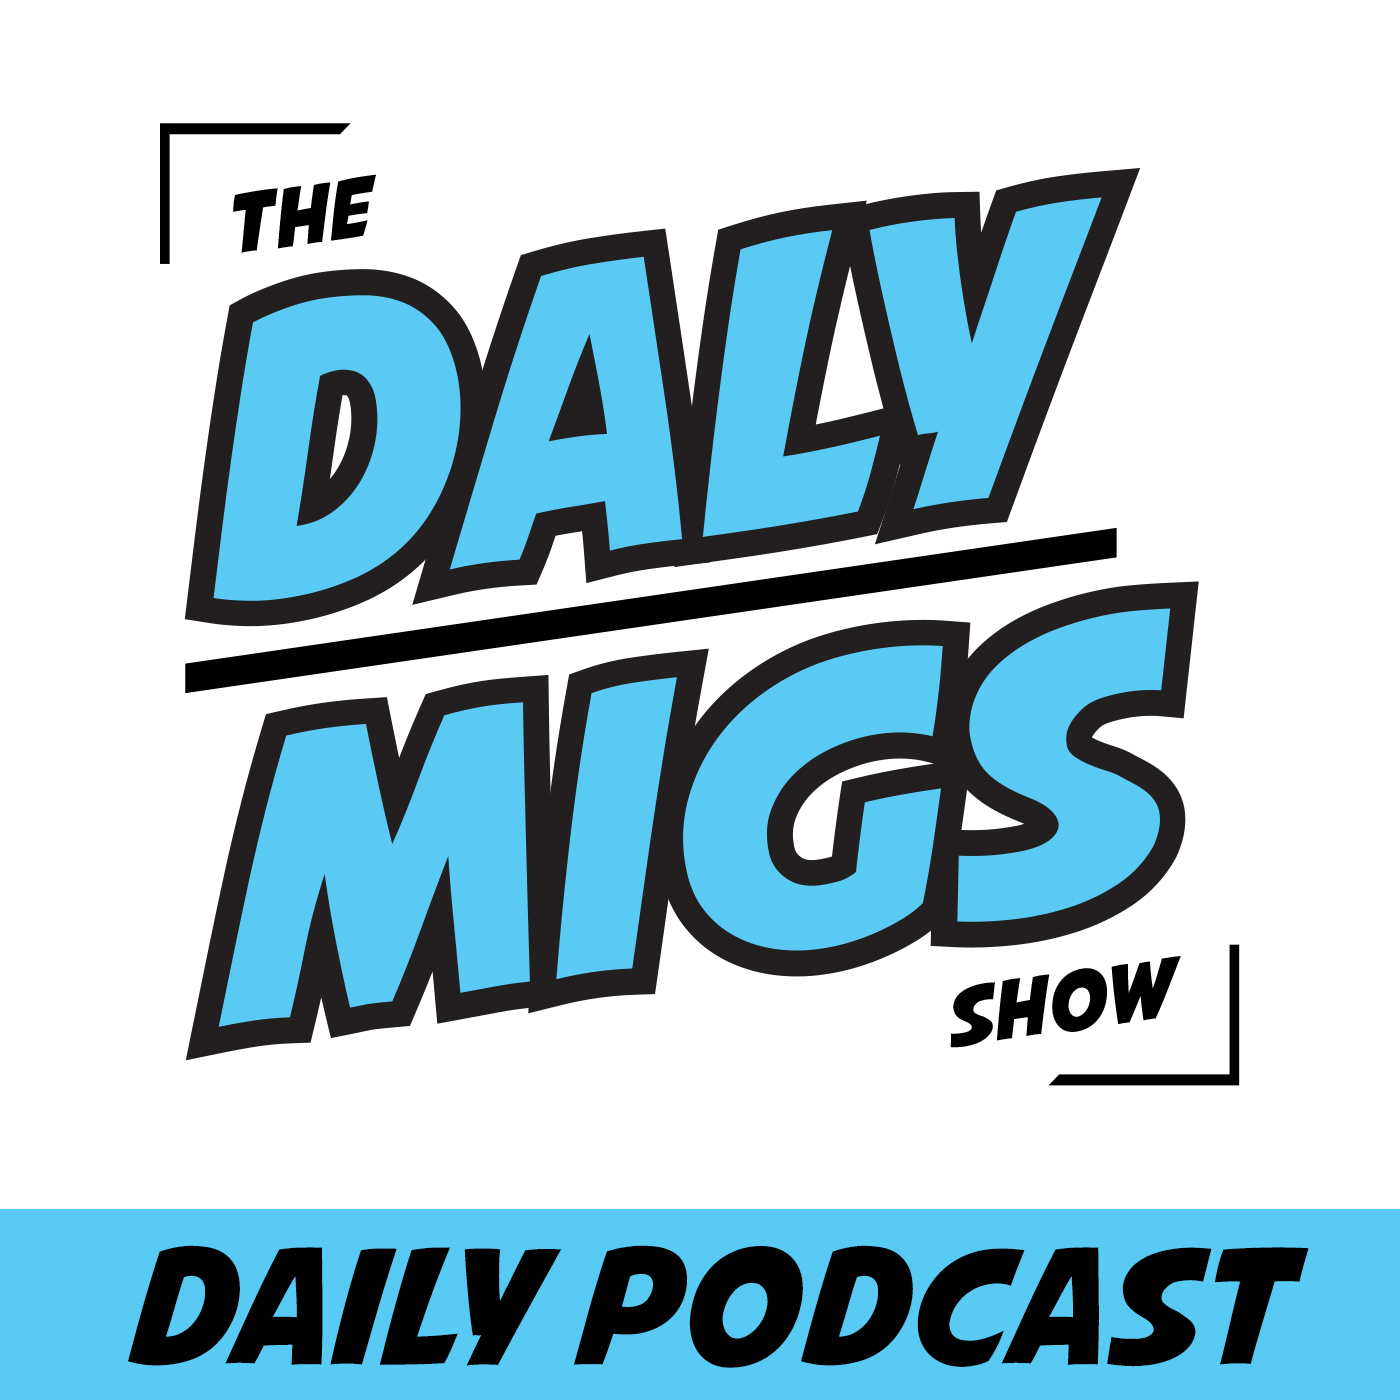 Daily Podcast pt. 1 - "Pez: A debate."